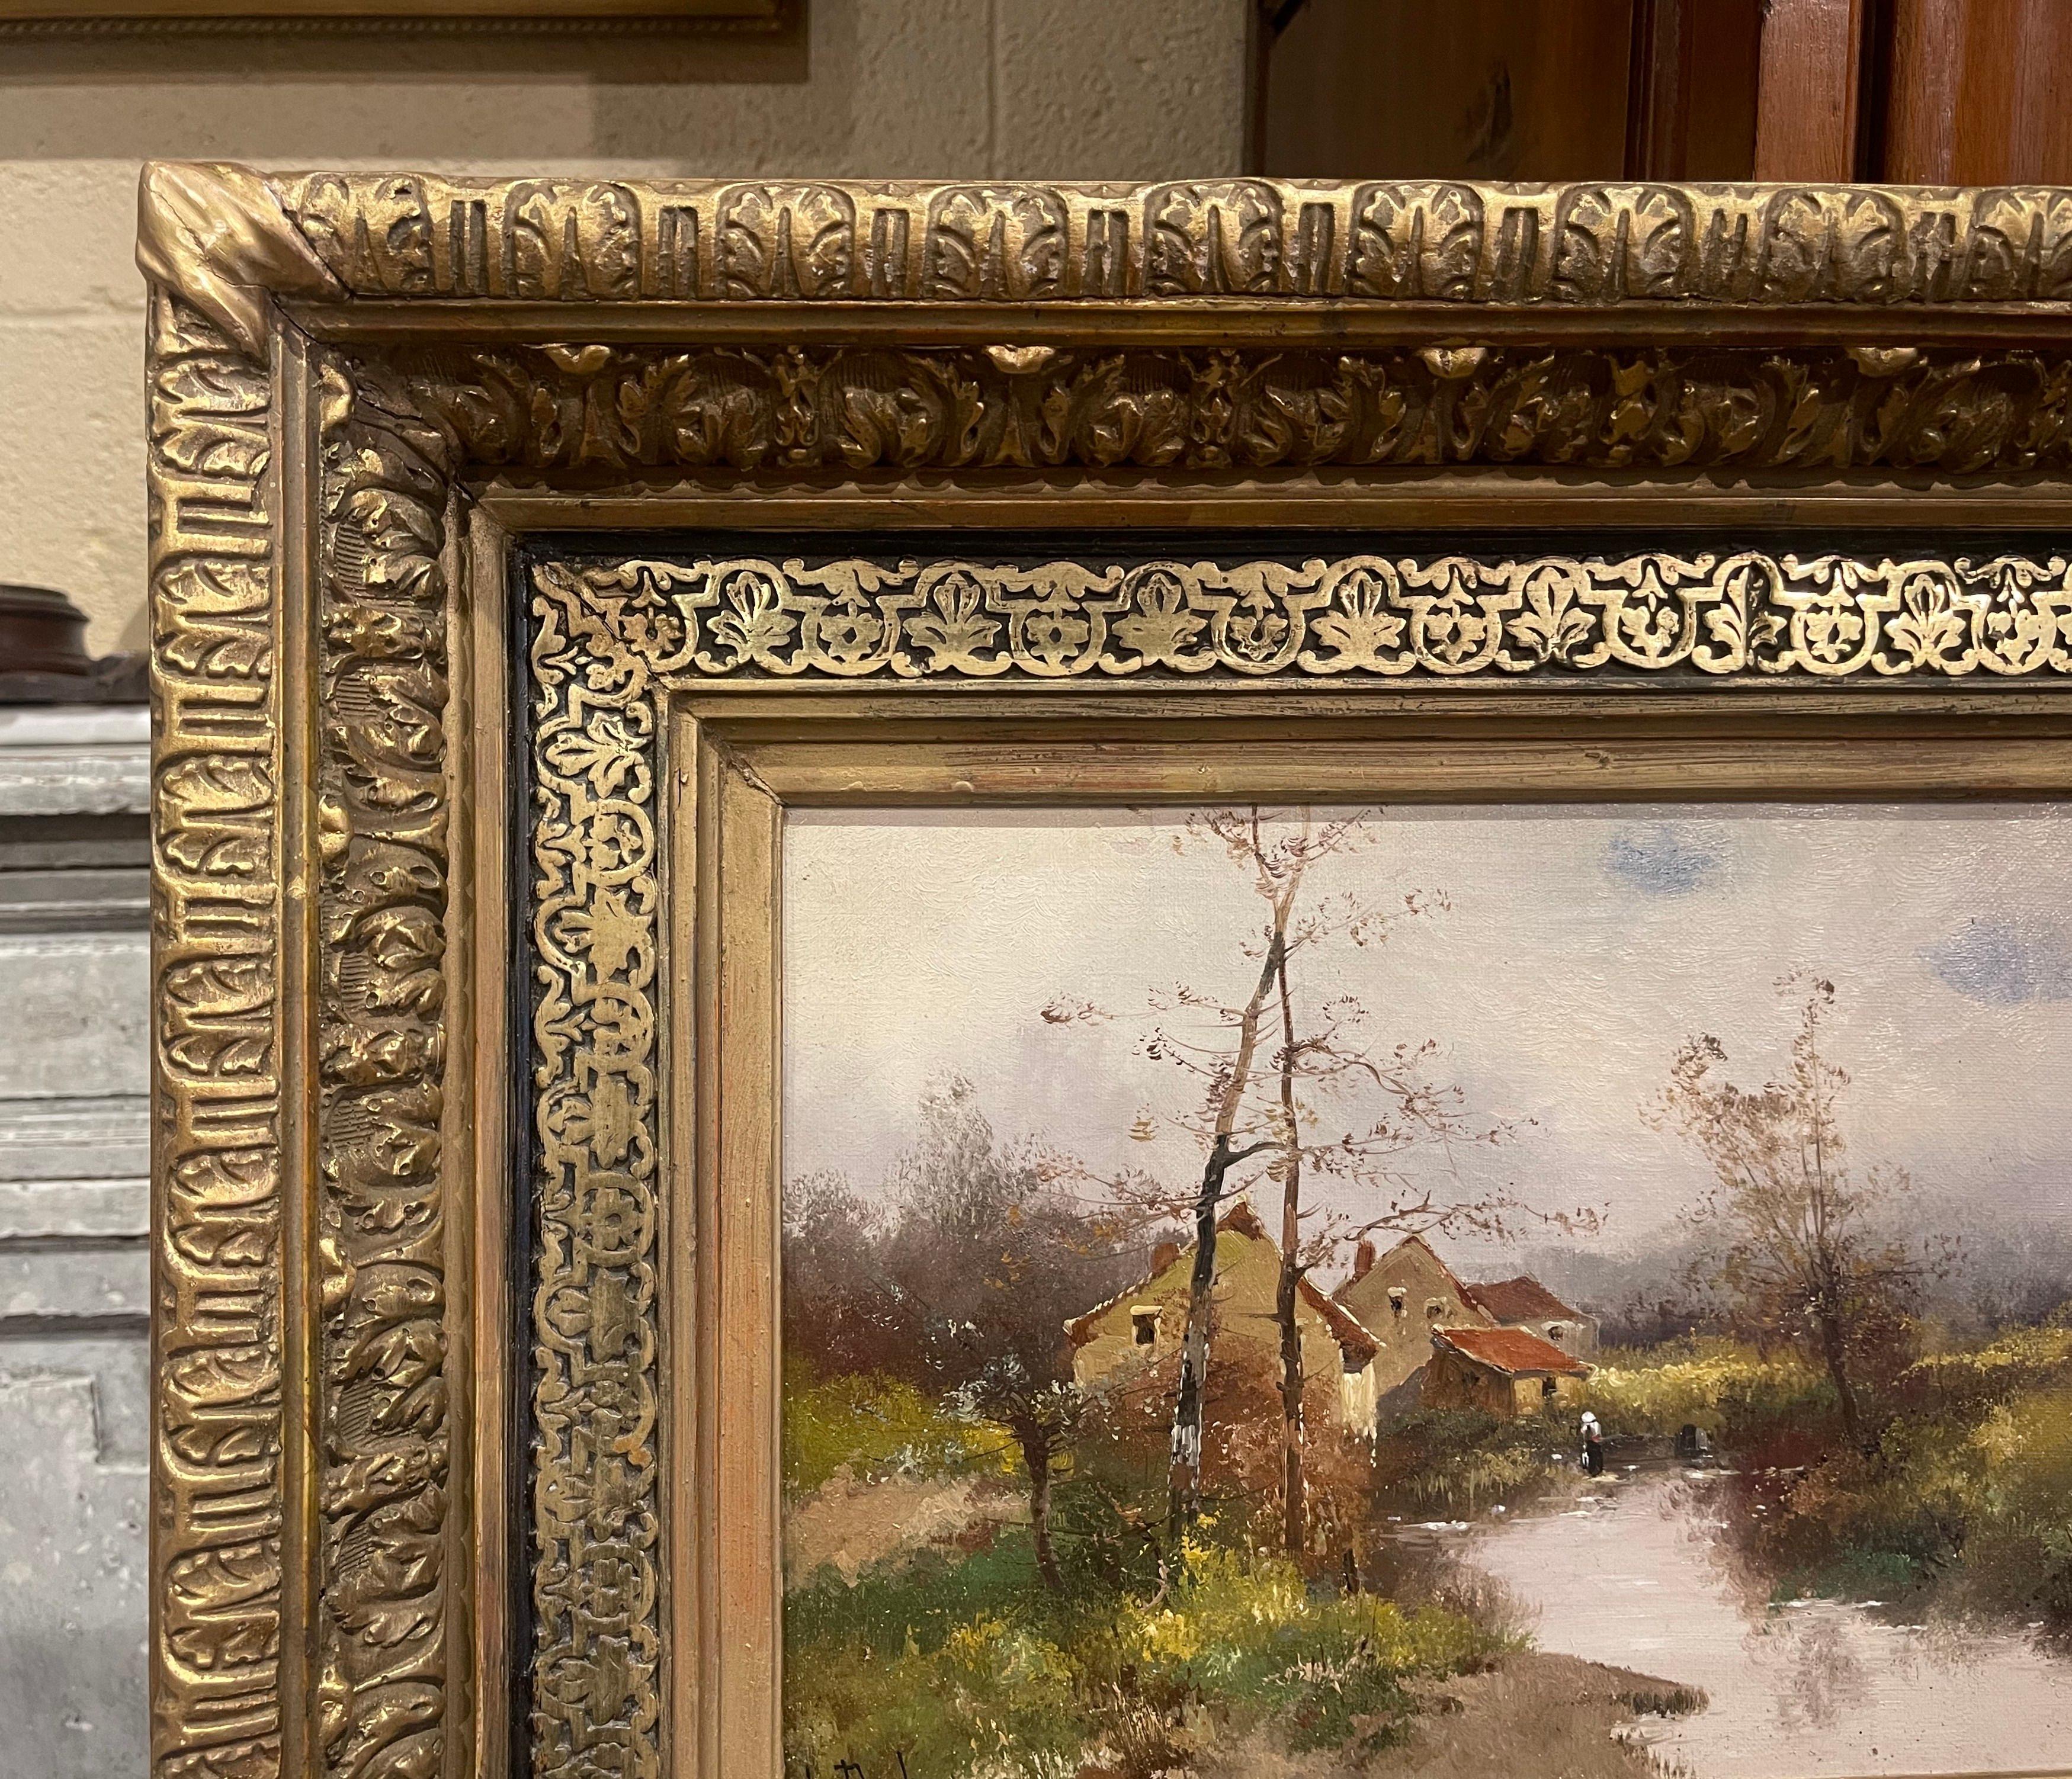  19th Century Landscapes Paintings Signed Dupuy for E. Galien-Laloue, Set of Two For Sale 7